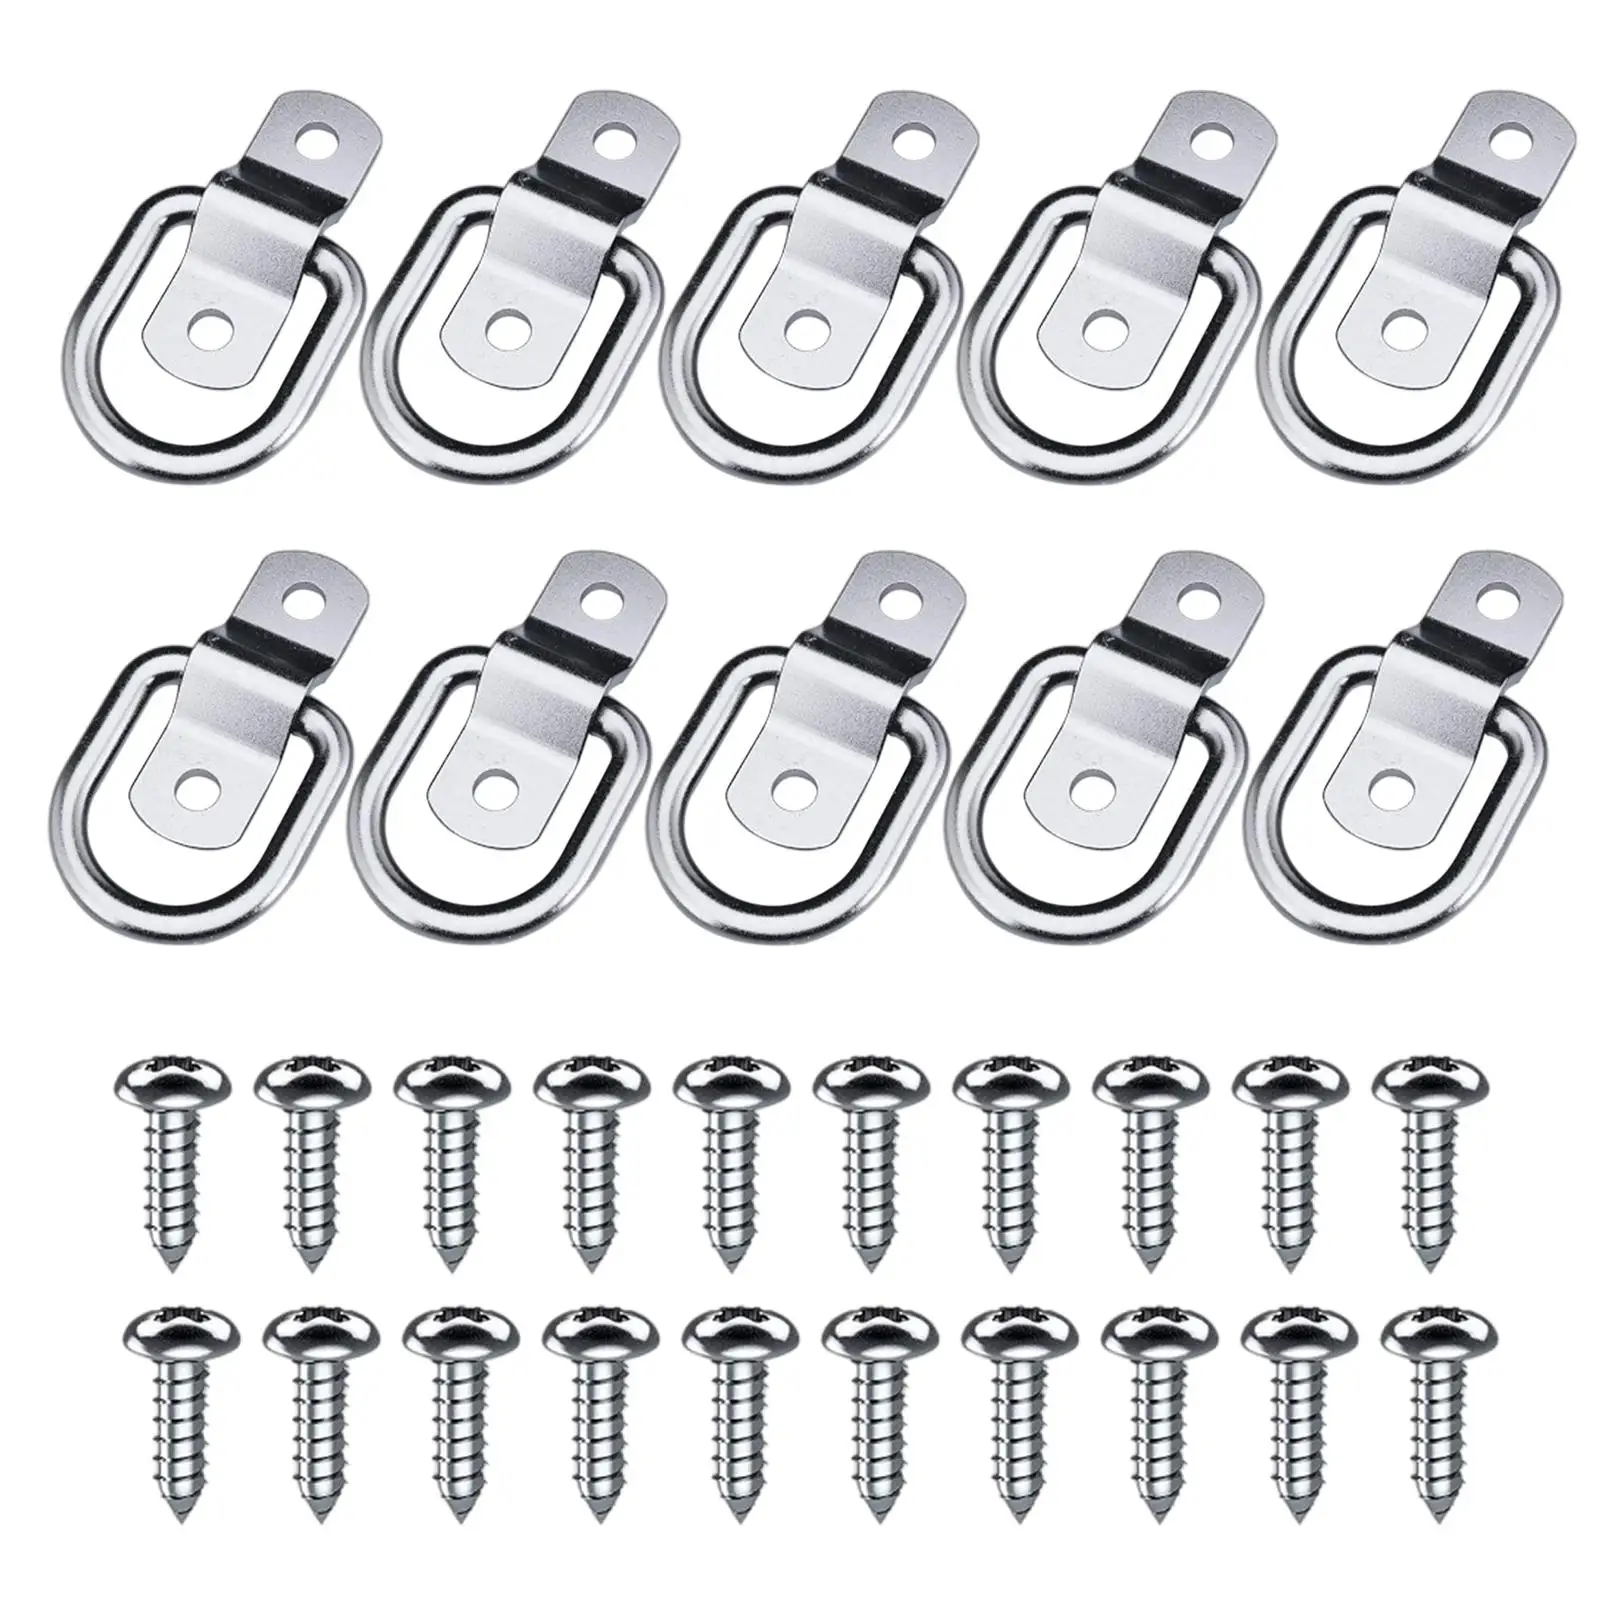 10 Pieces Bolt On D Rings with Screws Surface Mounting Heavy Duty Trailer Anchors Points Tie Downs for Trucks Trailers Canoe ATV